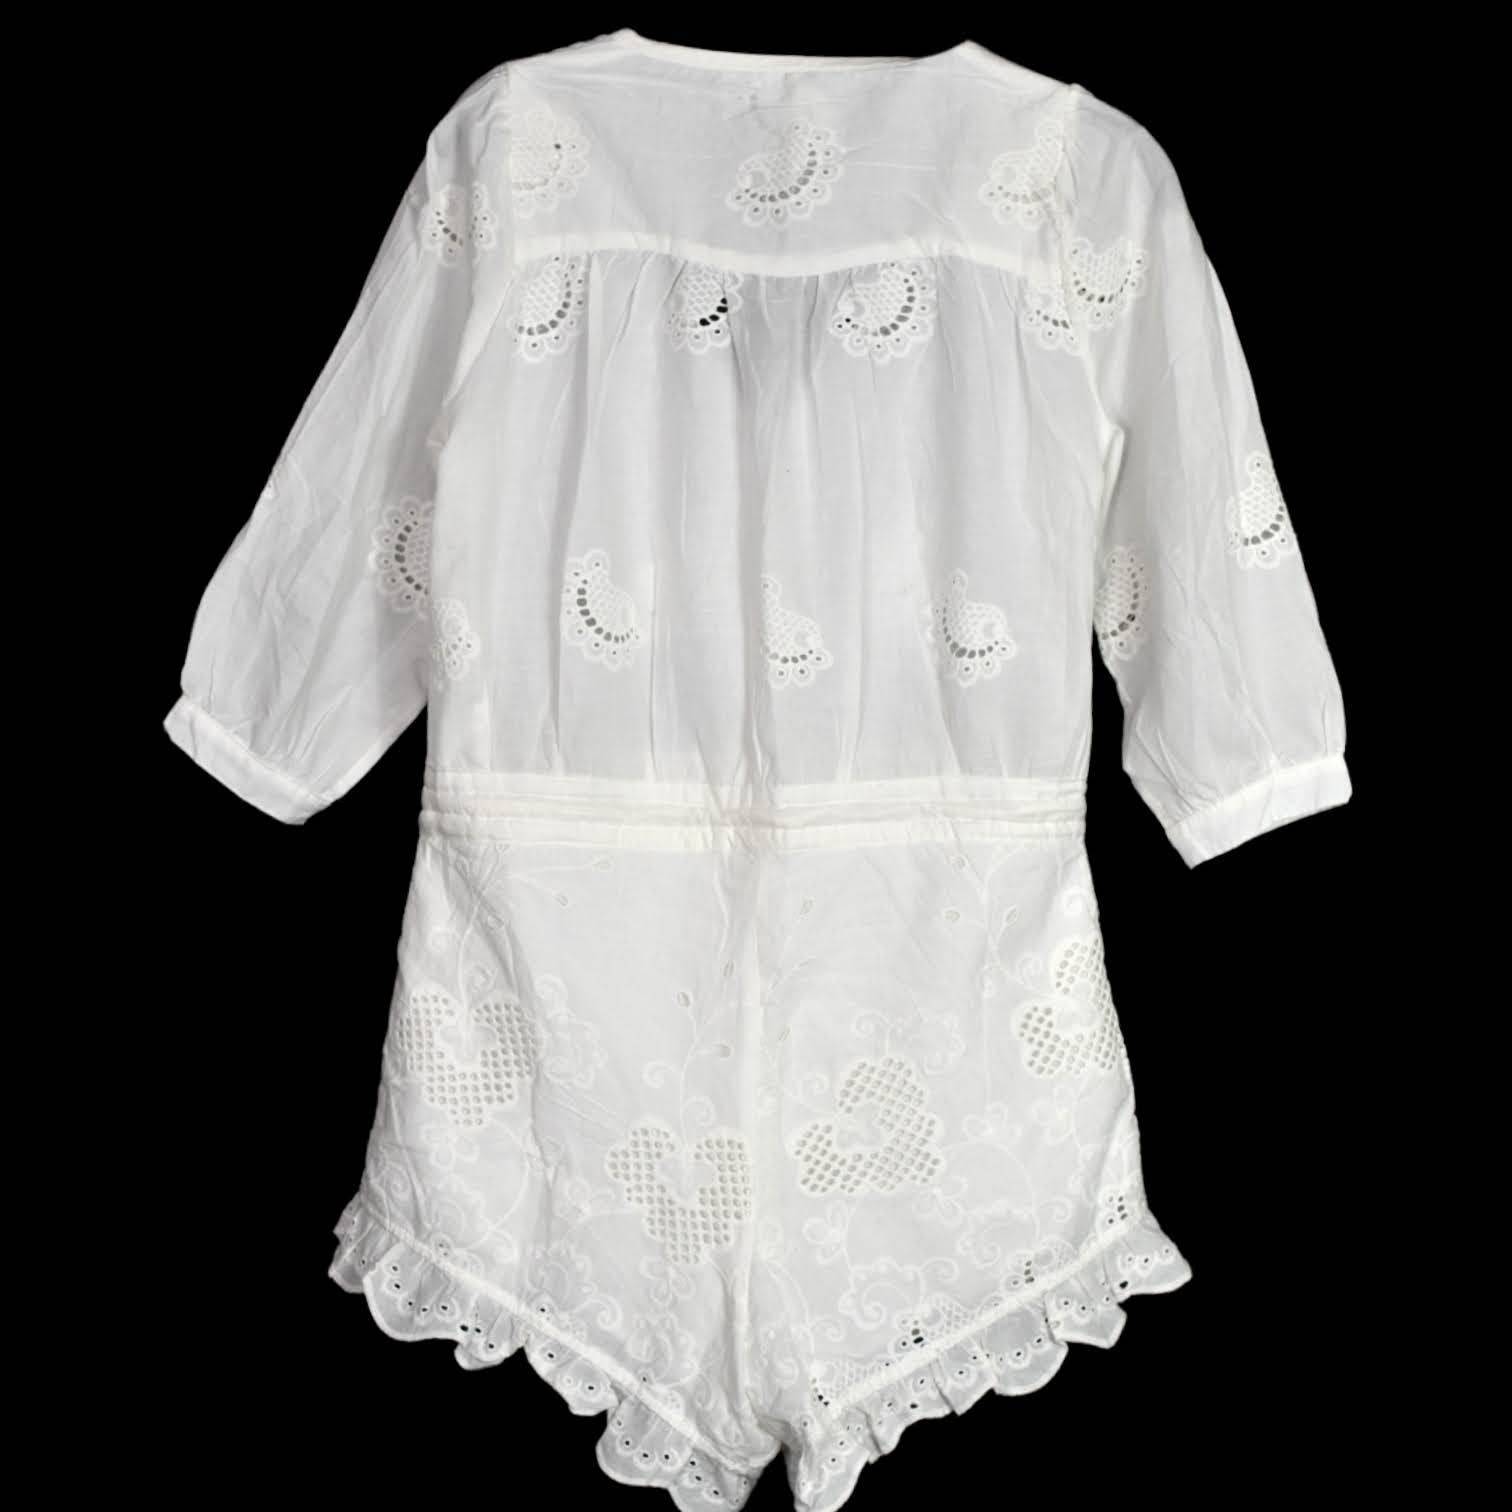 Spell Casablanca Romper White Playsuit Embroidered Drawstring Shorts Size XS